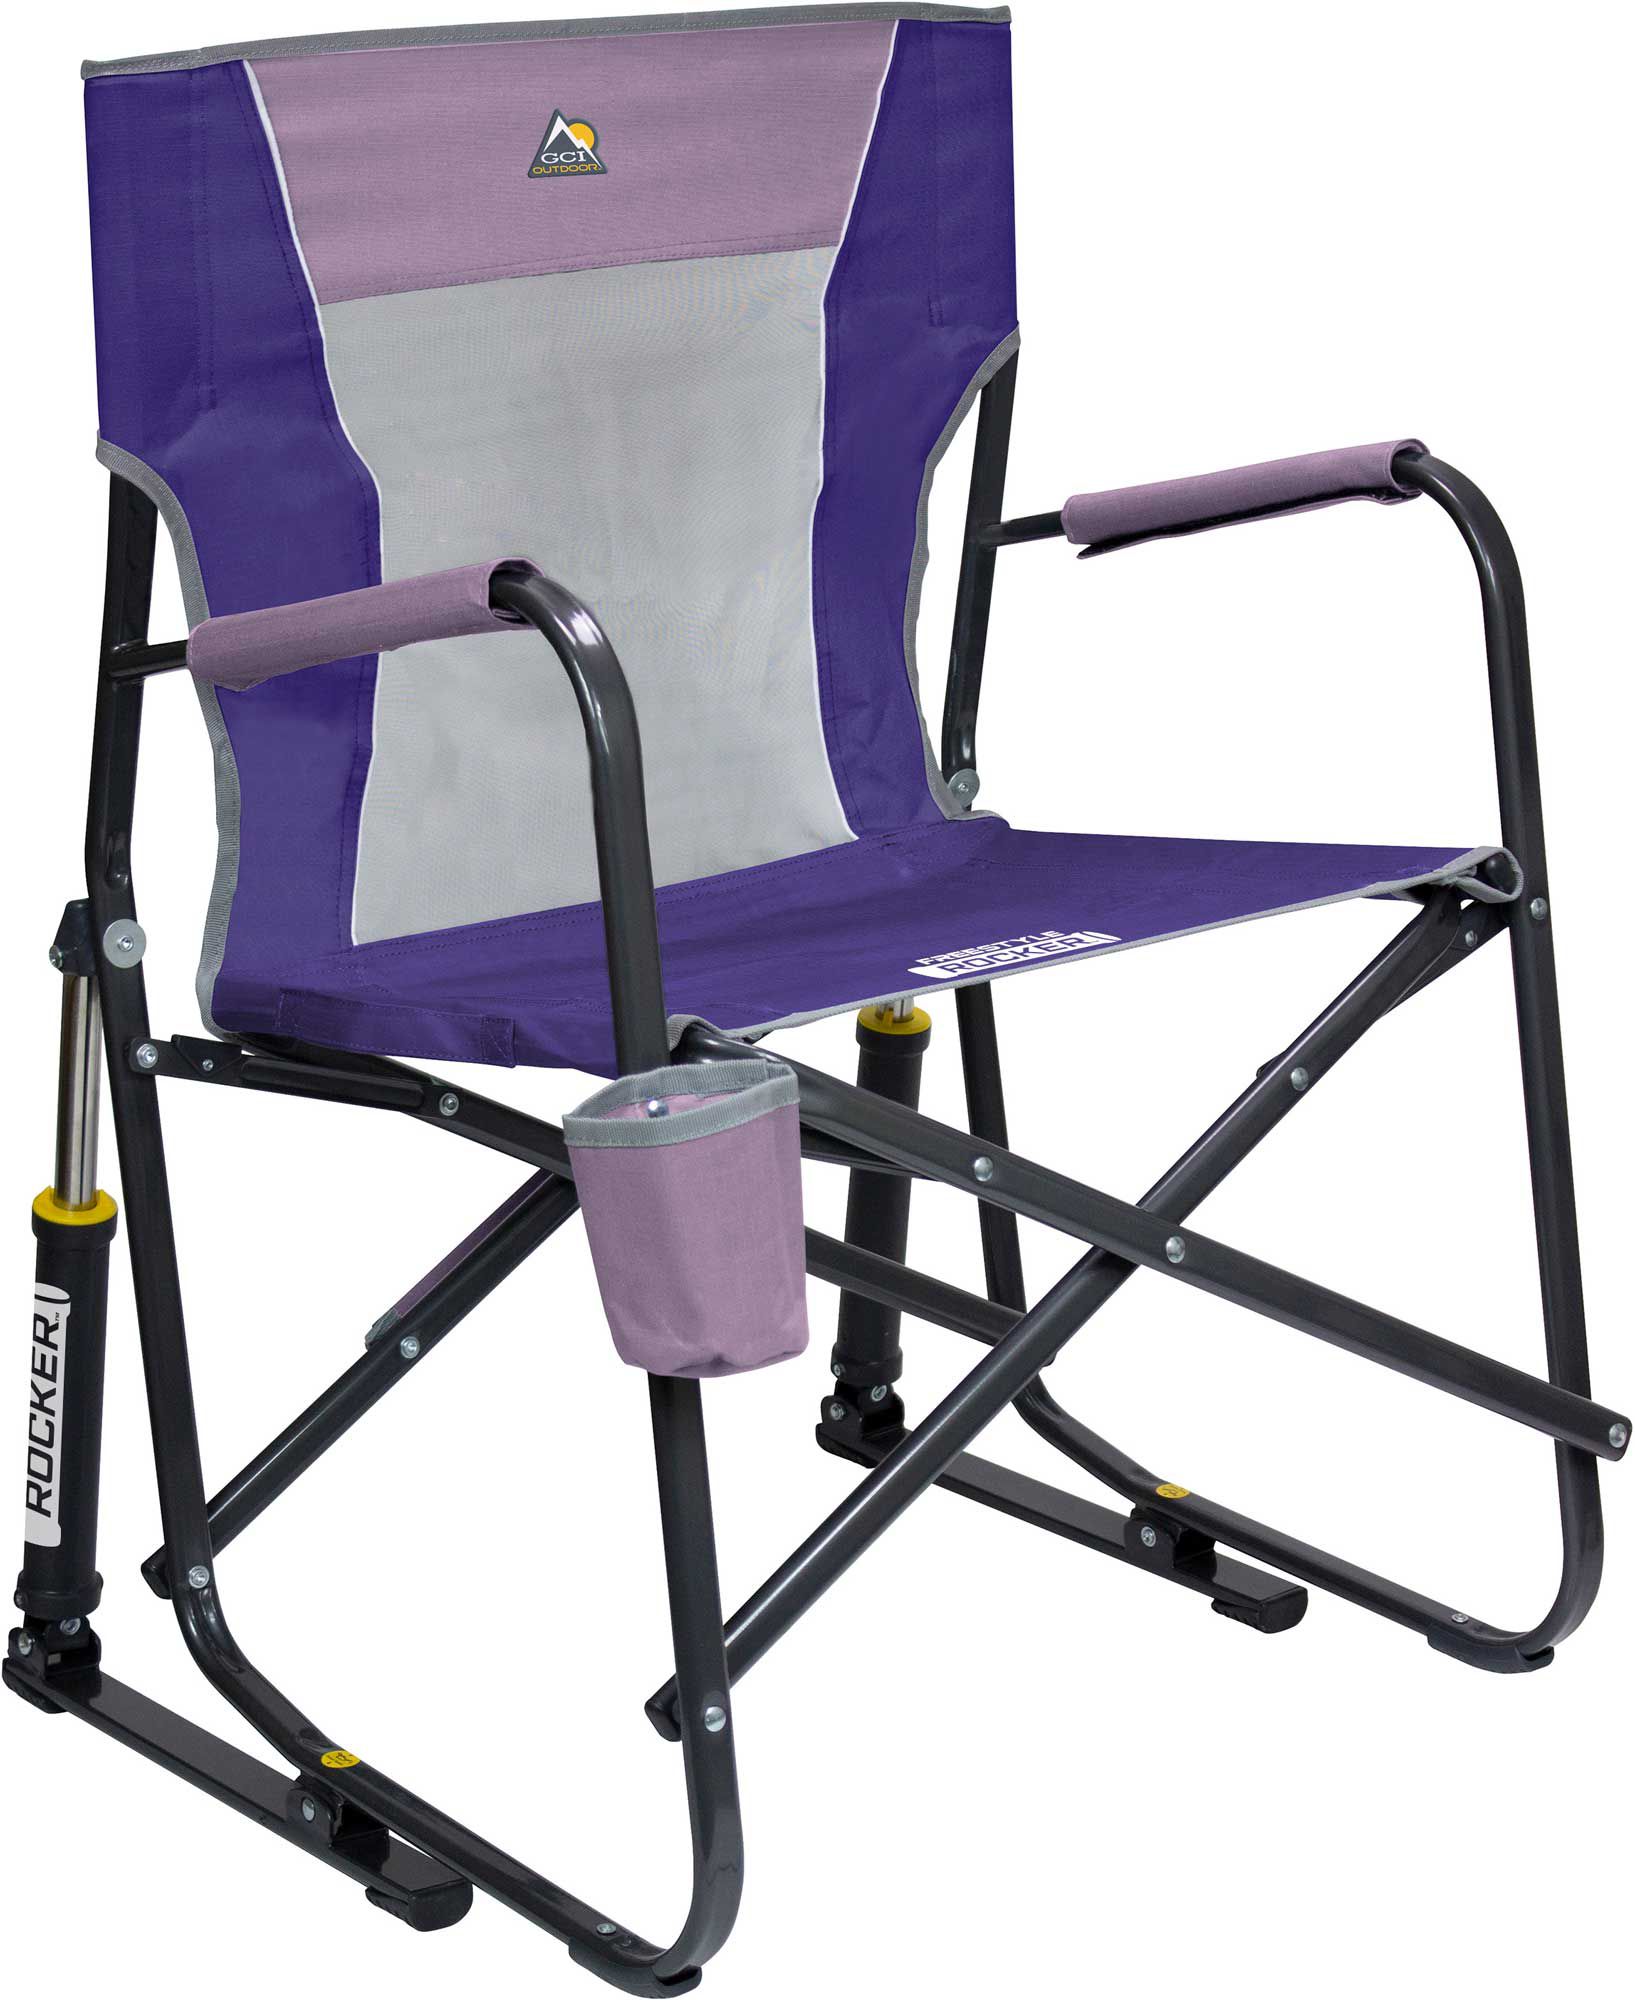 GCI Outdoor Freestyle Rocker Mesh Chair Folding Portable Camping Cup Holder NEW